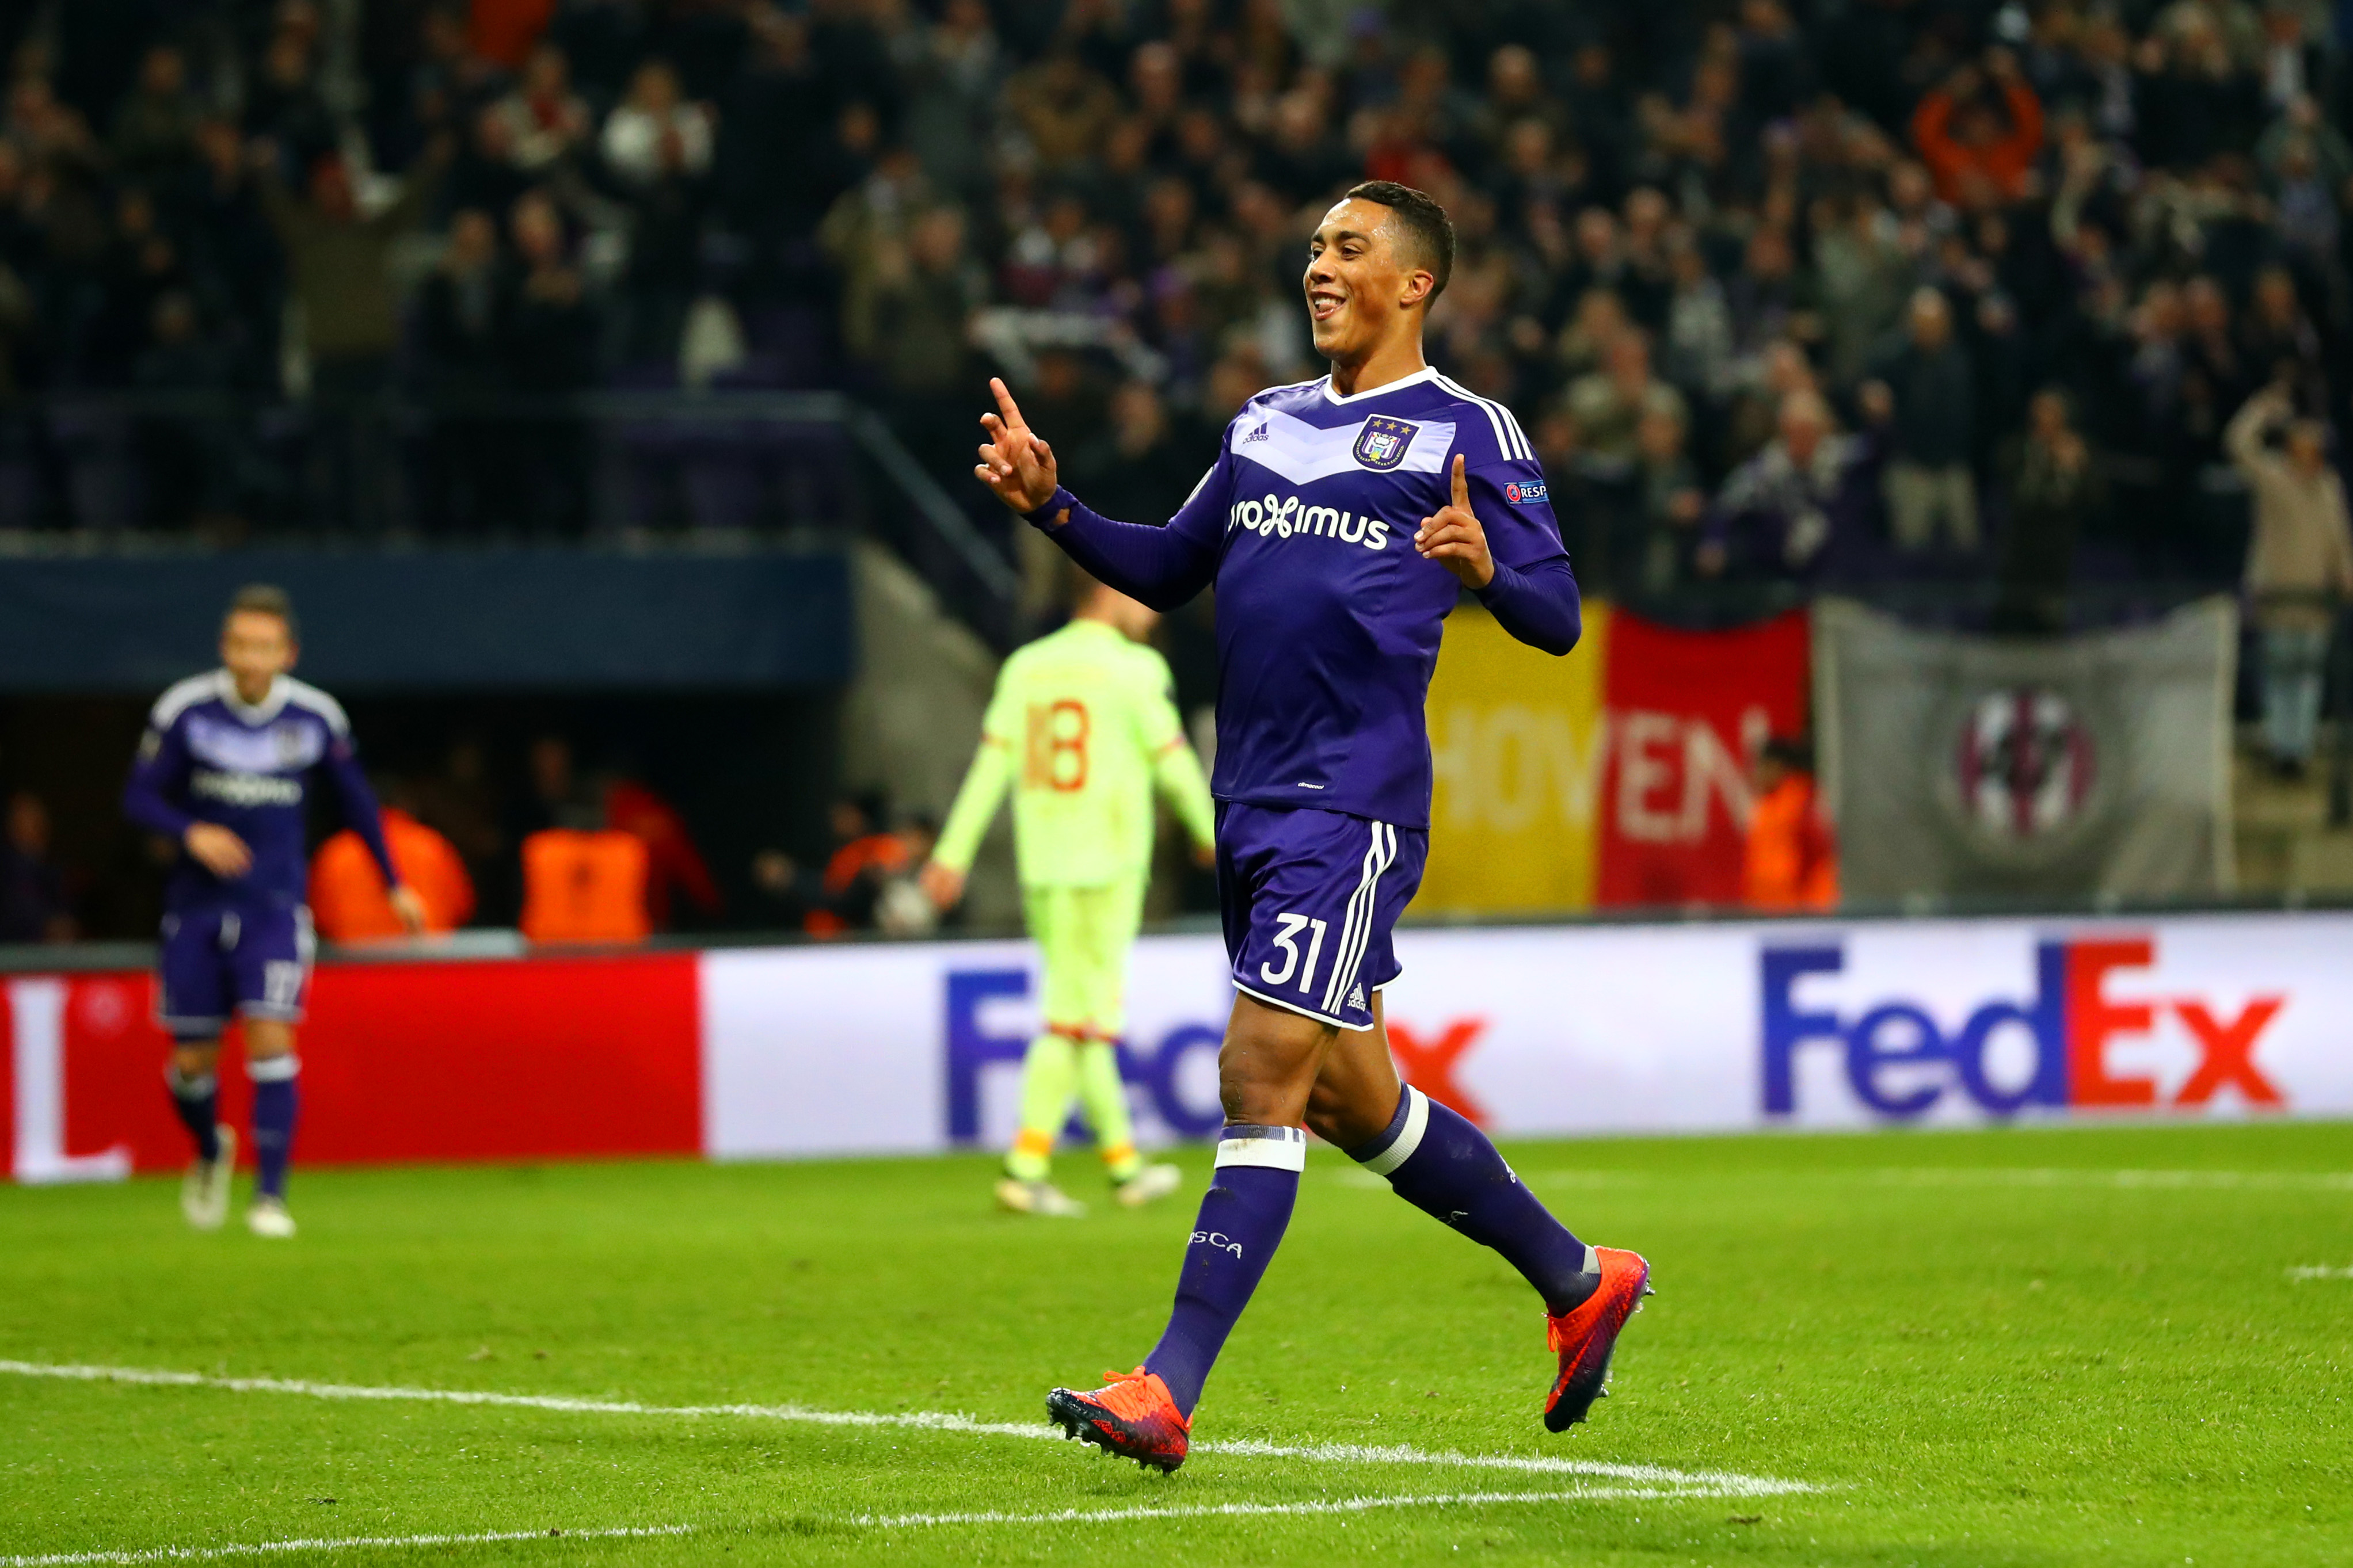 BRUSSELS, BELGIUM - NOVEMBER 03:  Youri Tielemans of RSC Anderlecht celebrates after scoring his team's thirkd goal during the UEFA Europa League Group C match between RSC Anderlecht and 1. FSV Mainz 05 at Constant Vanden Stock Stadium on November 3, 2016 in Brussels, Belgium.  (Photo by Dean Mouhtaropoulos/Getty Images)